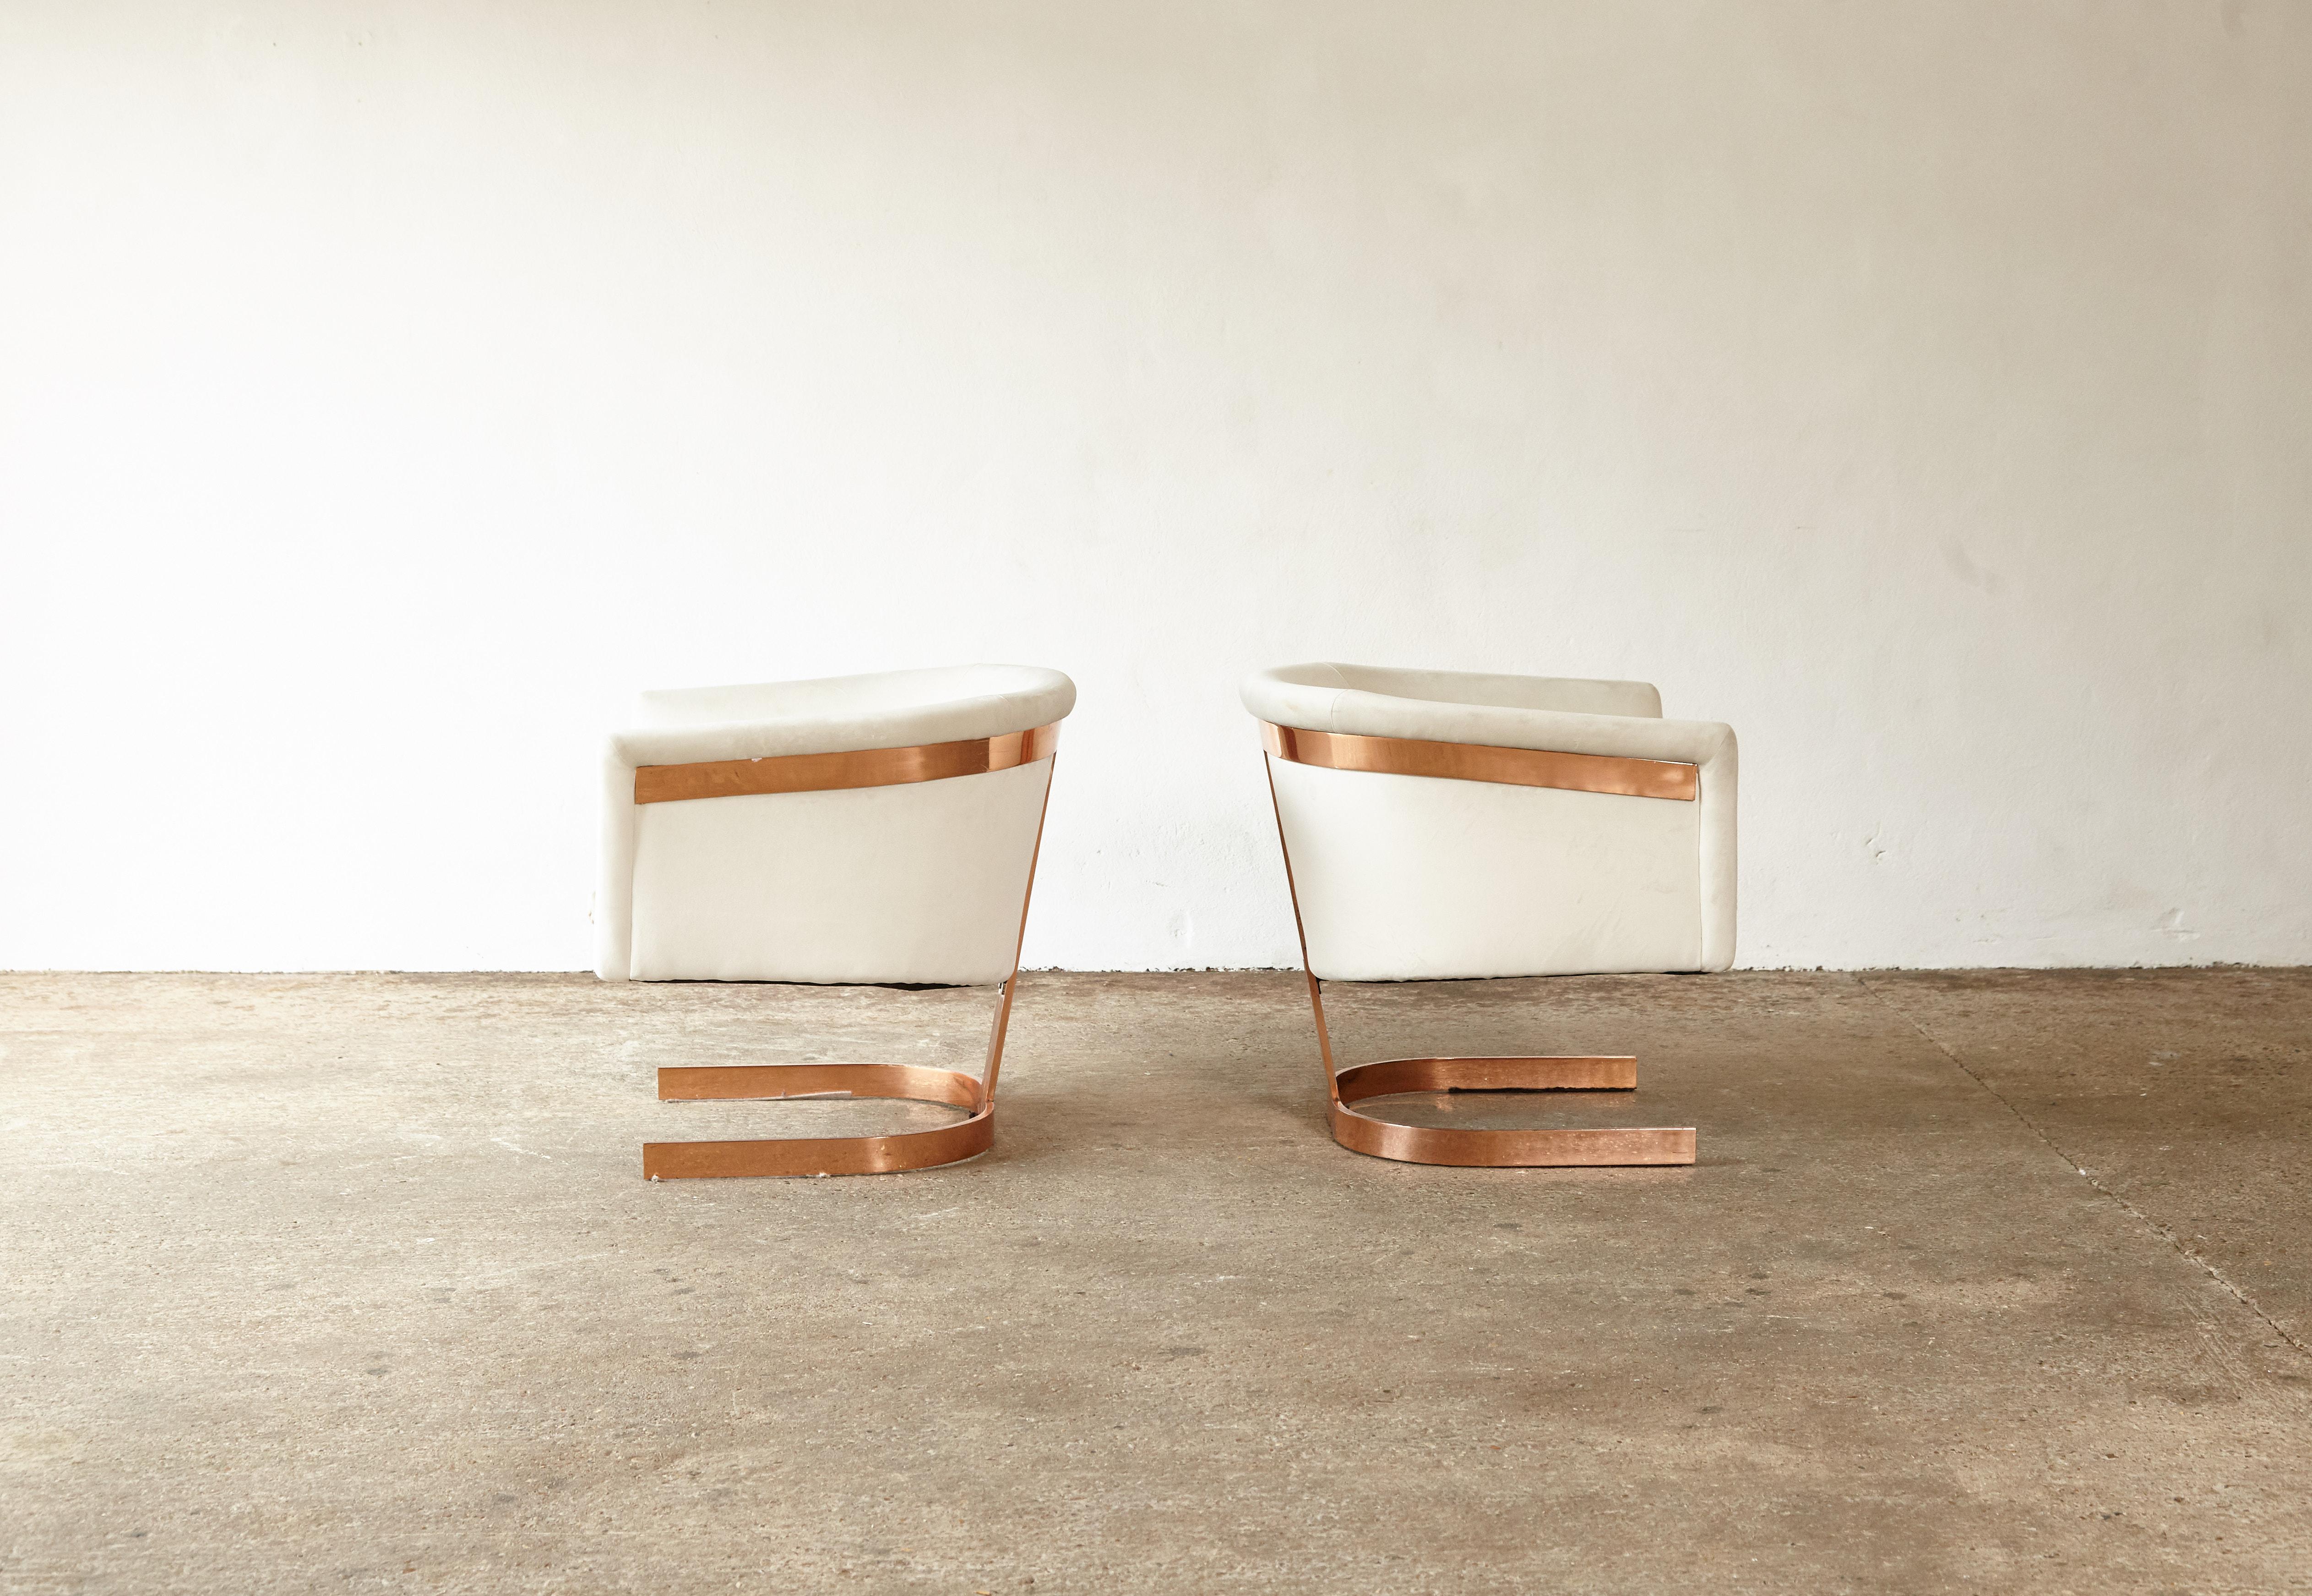 20th Century Pair of Copper Framed Cantilevered Chairs, 1970s / Milo Baughman Style, USA